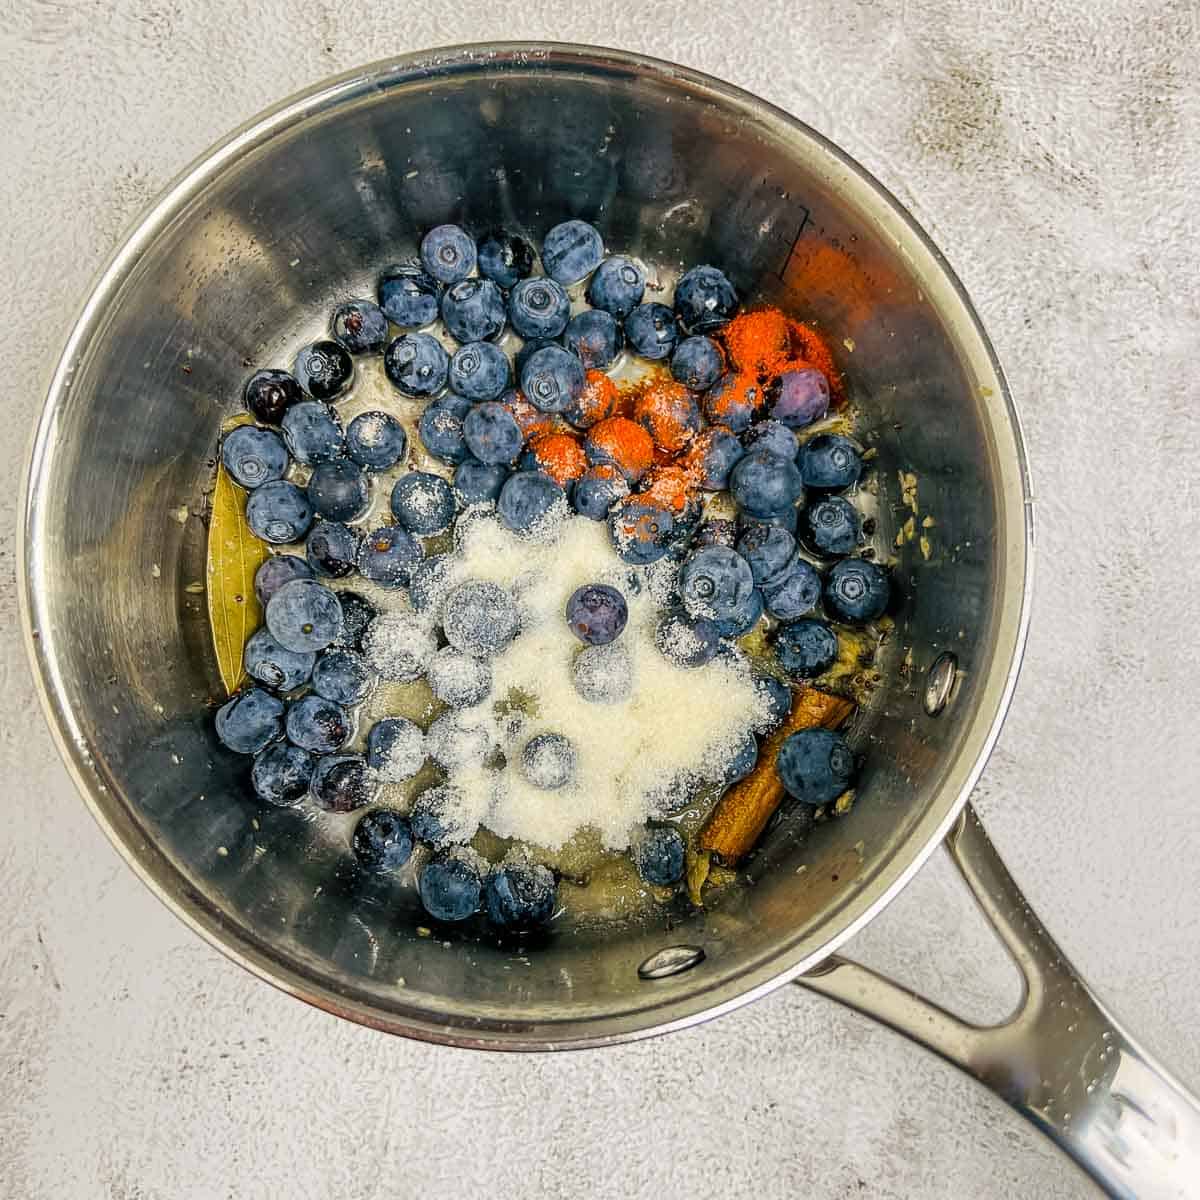 Step showing the addition of blueberries and remaining ingredients.